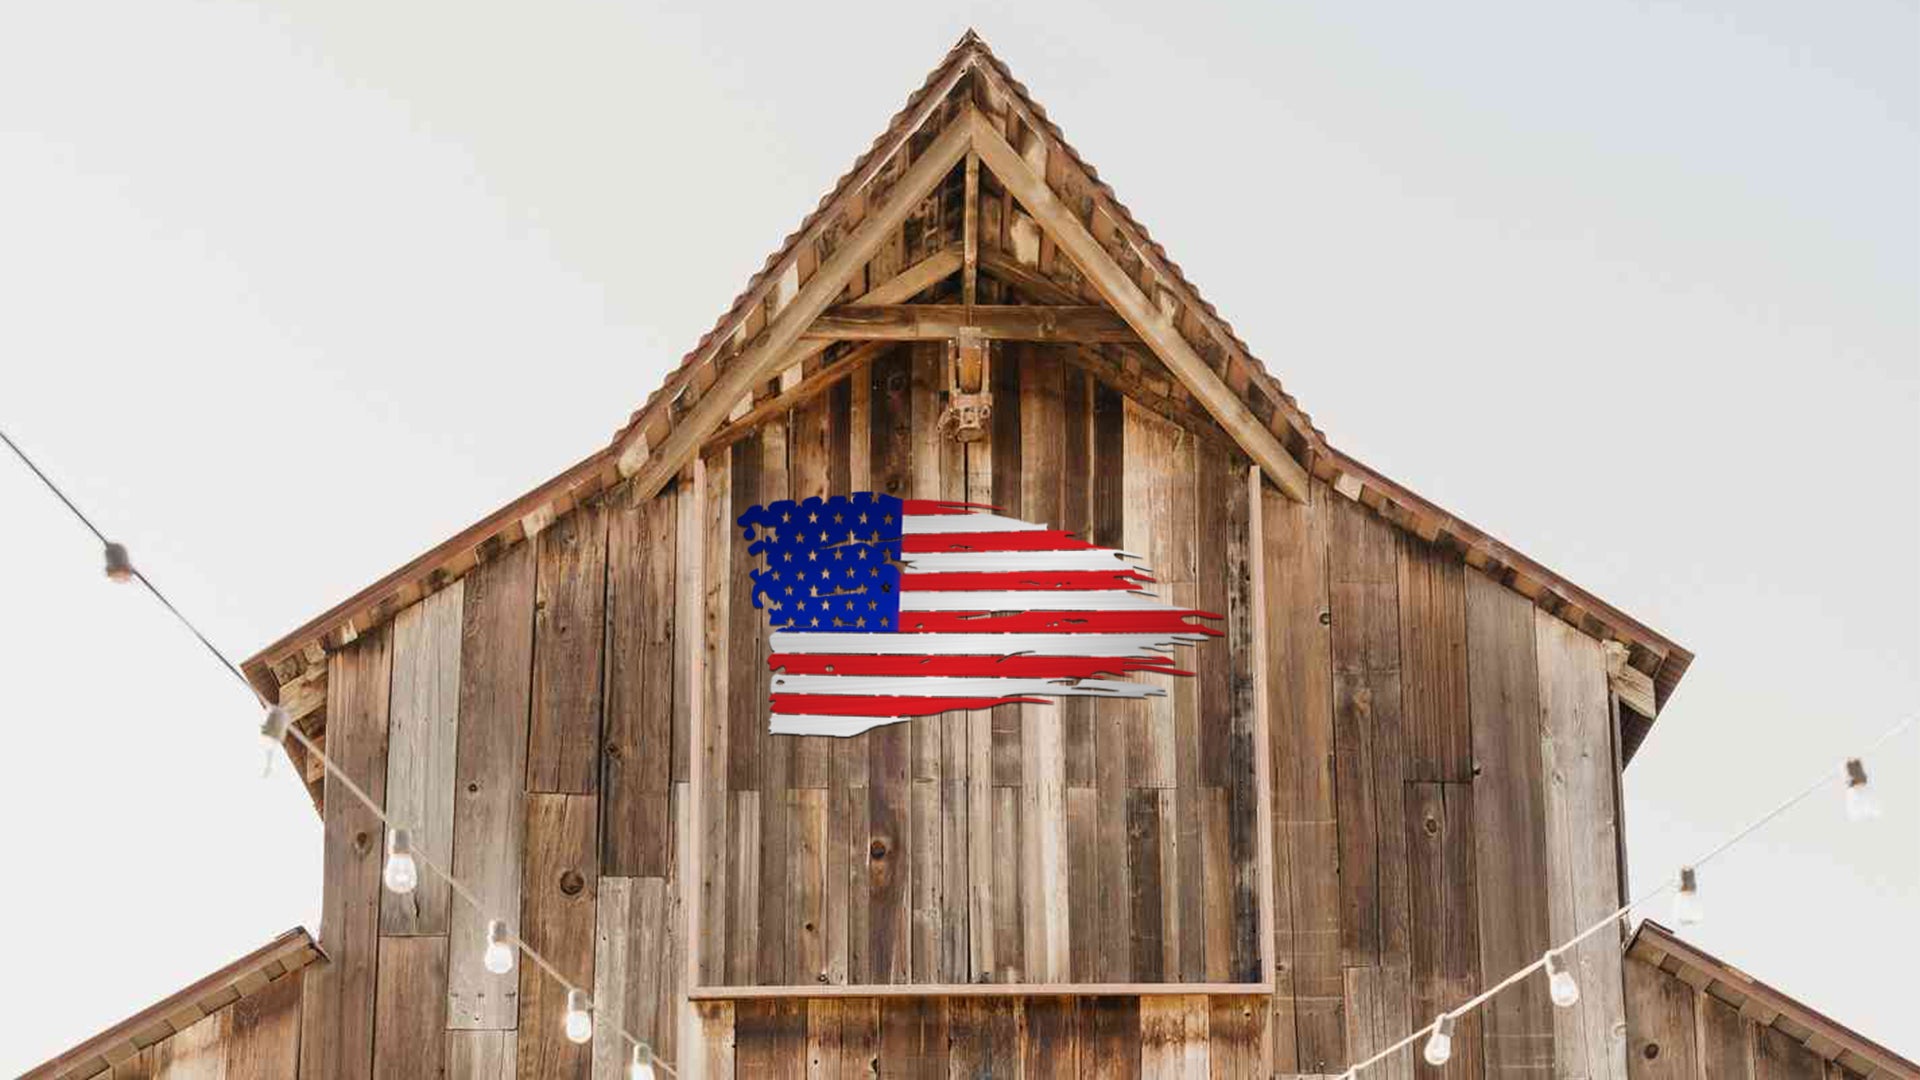 Colossal Old Glory